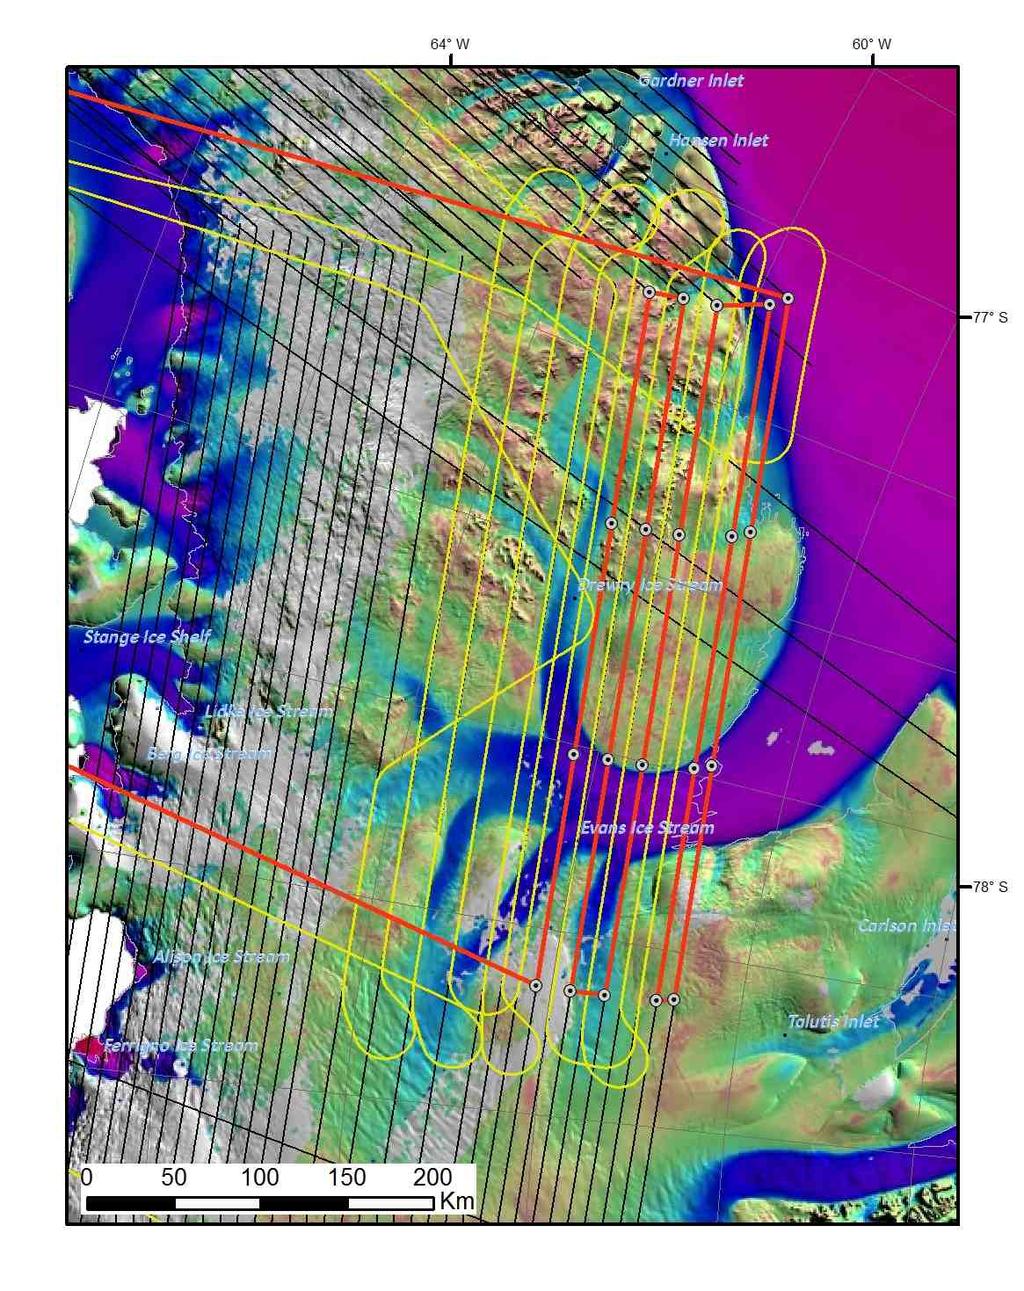 LVIS 2012 Antarctica Mapping Lines 7/13/12 15 Evans: Priority 3 Flight: Evans Fill Within P3 Area: Lowest 20km line spacing.